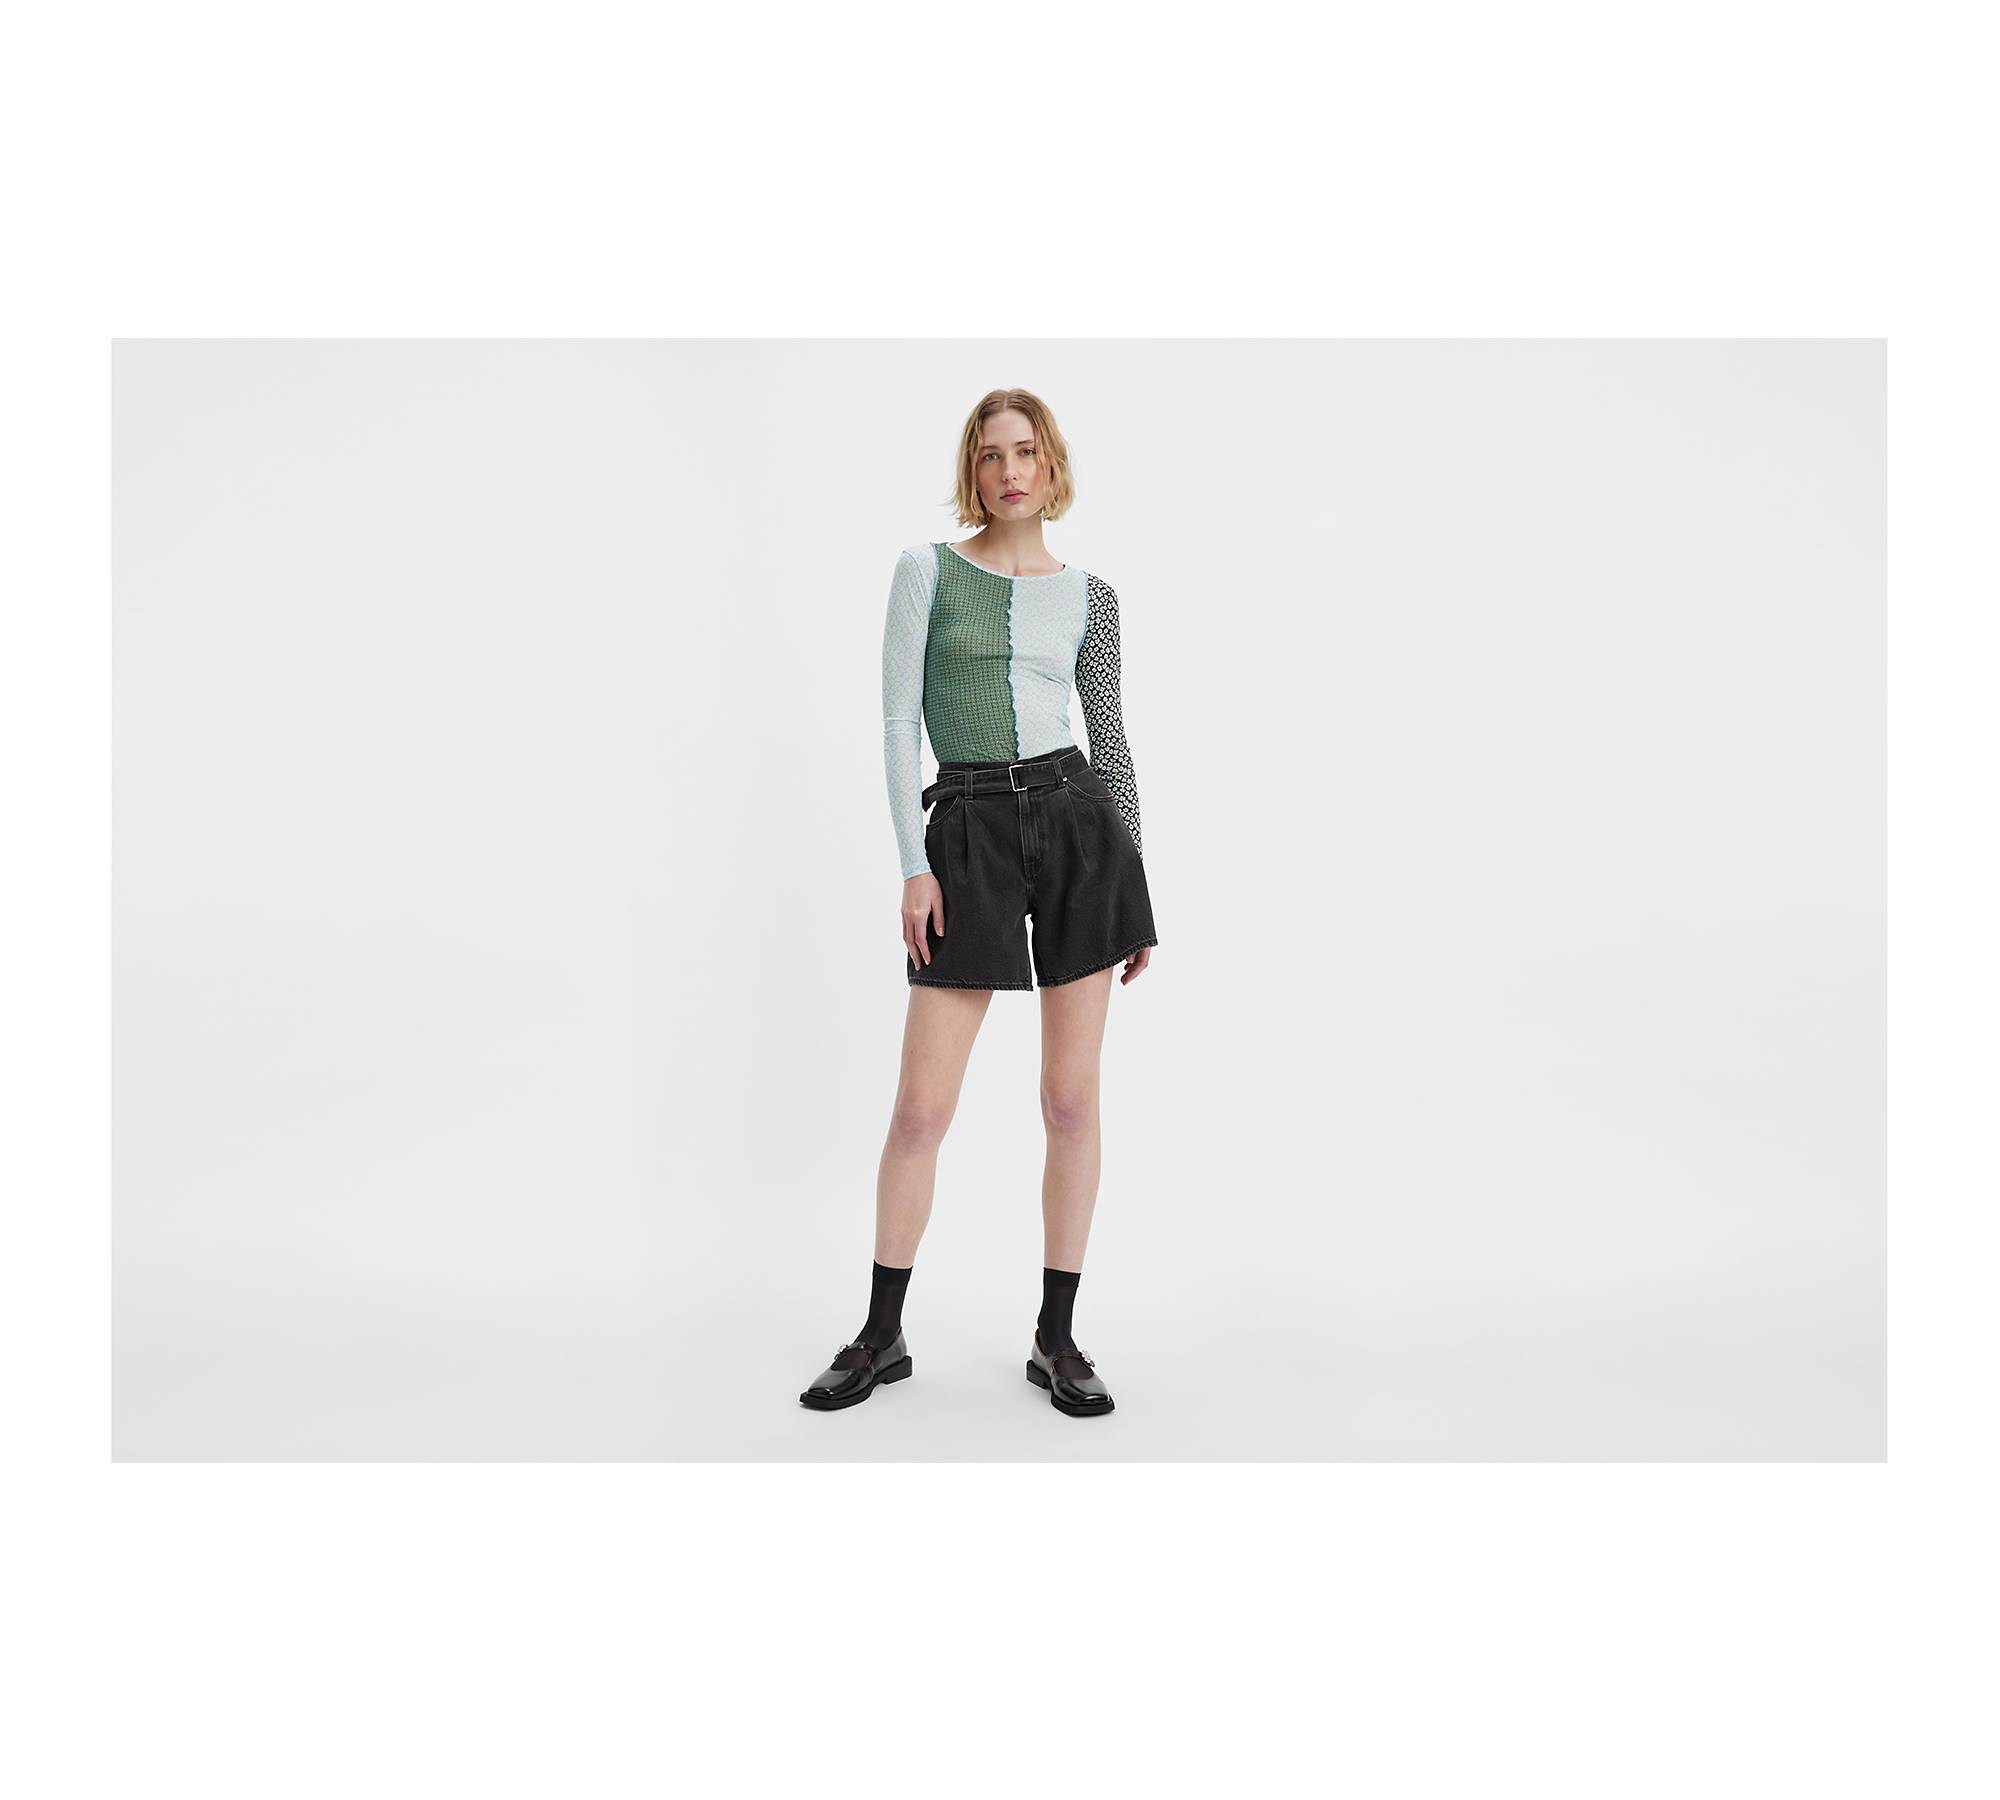 Belted Baggy Women's Shorts - Black | Levi's® US